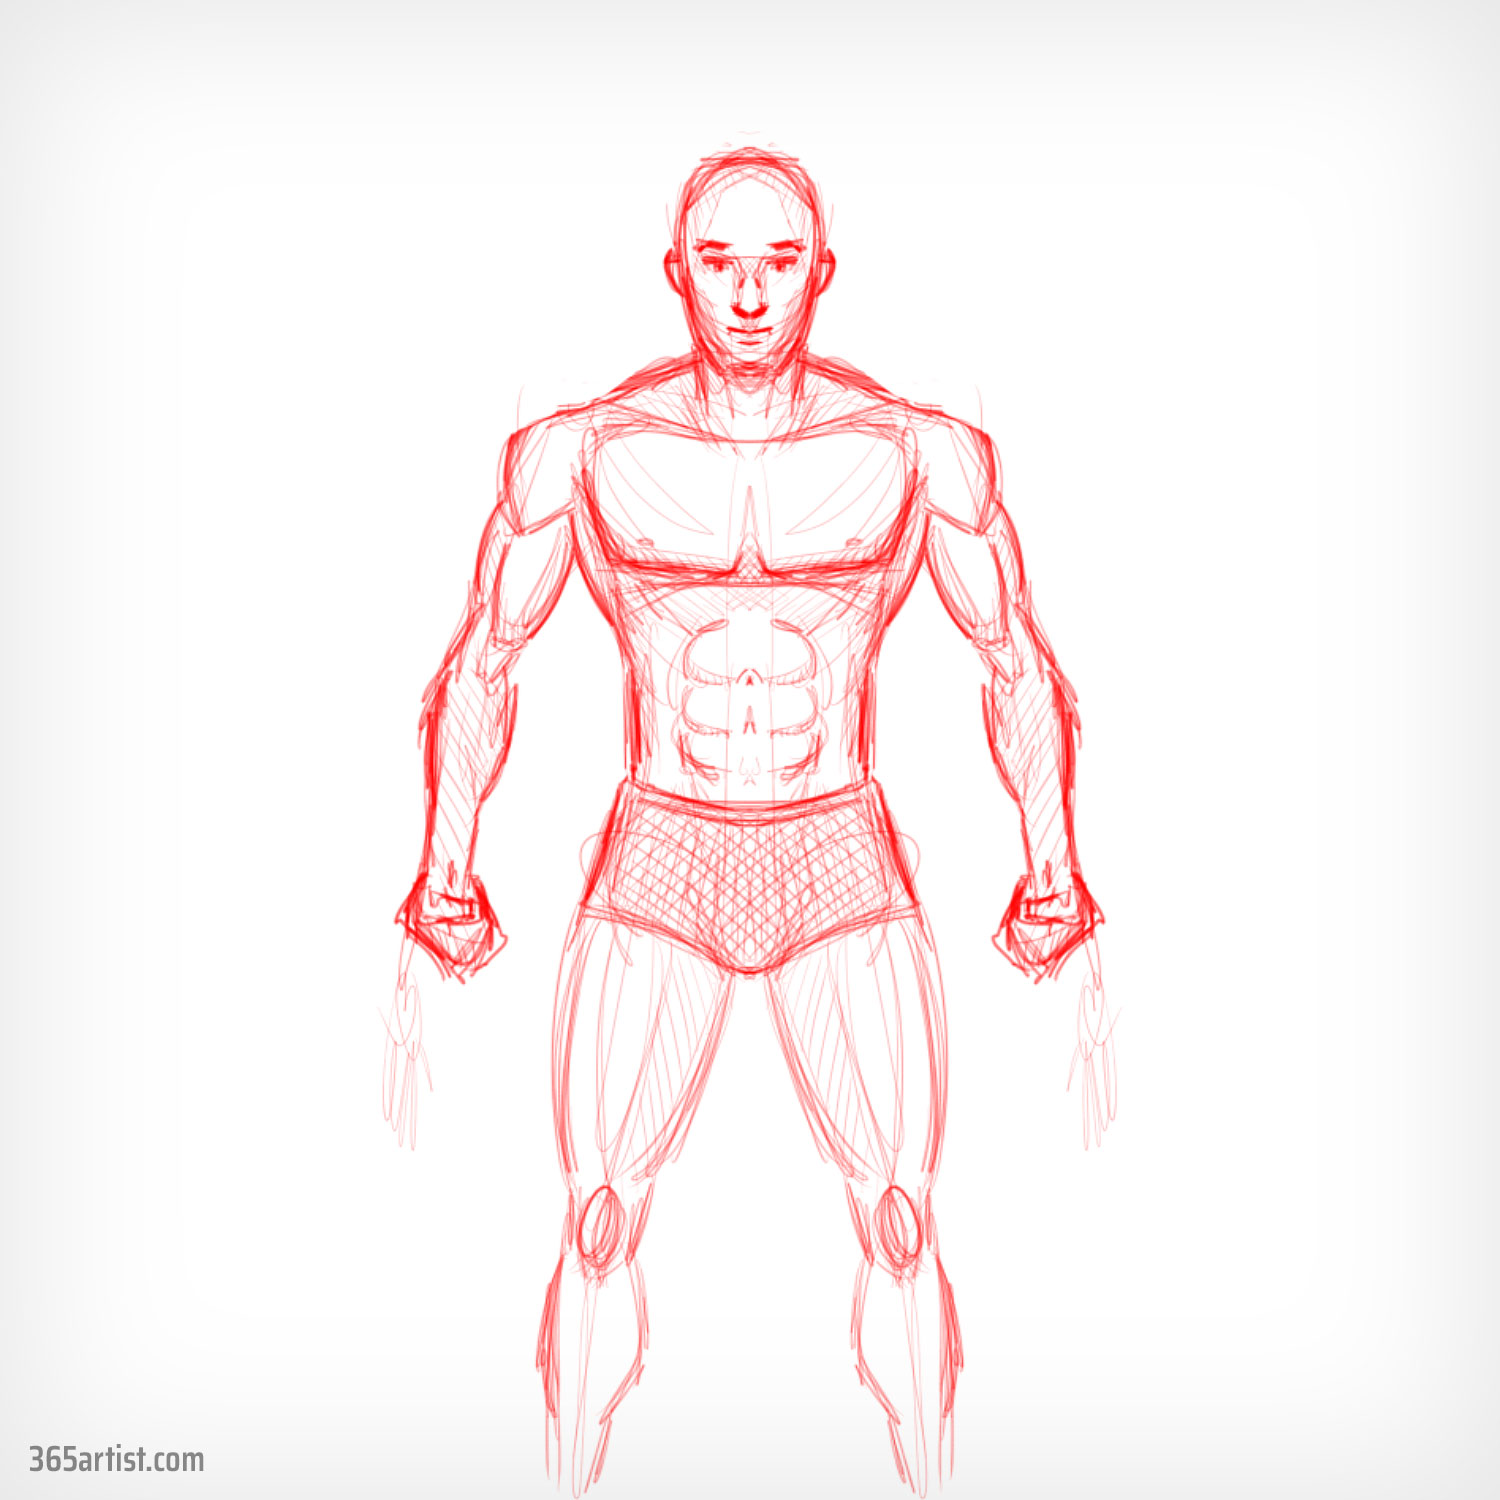 drawing of muscle man